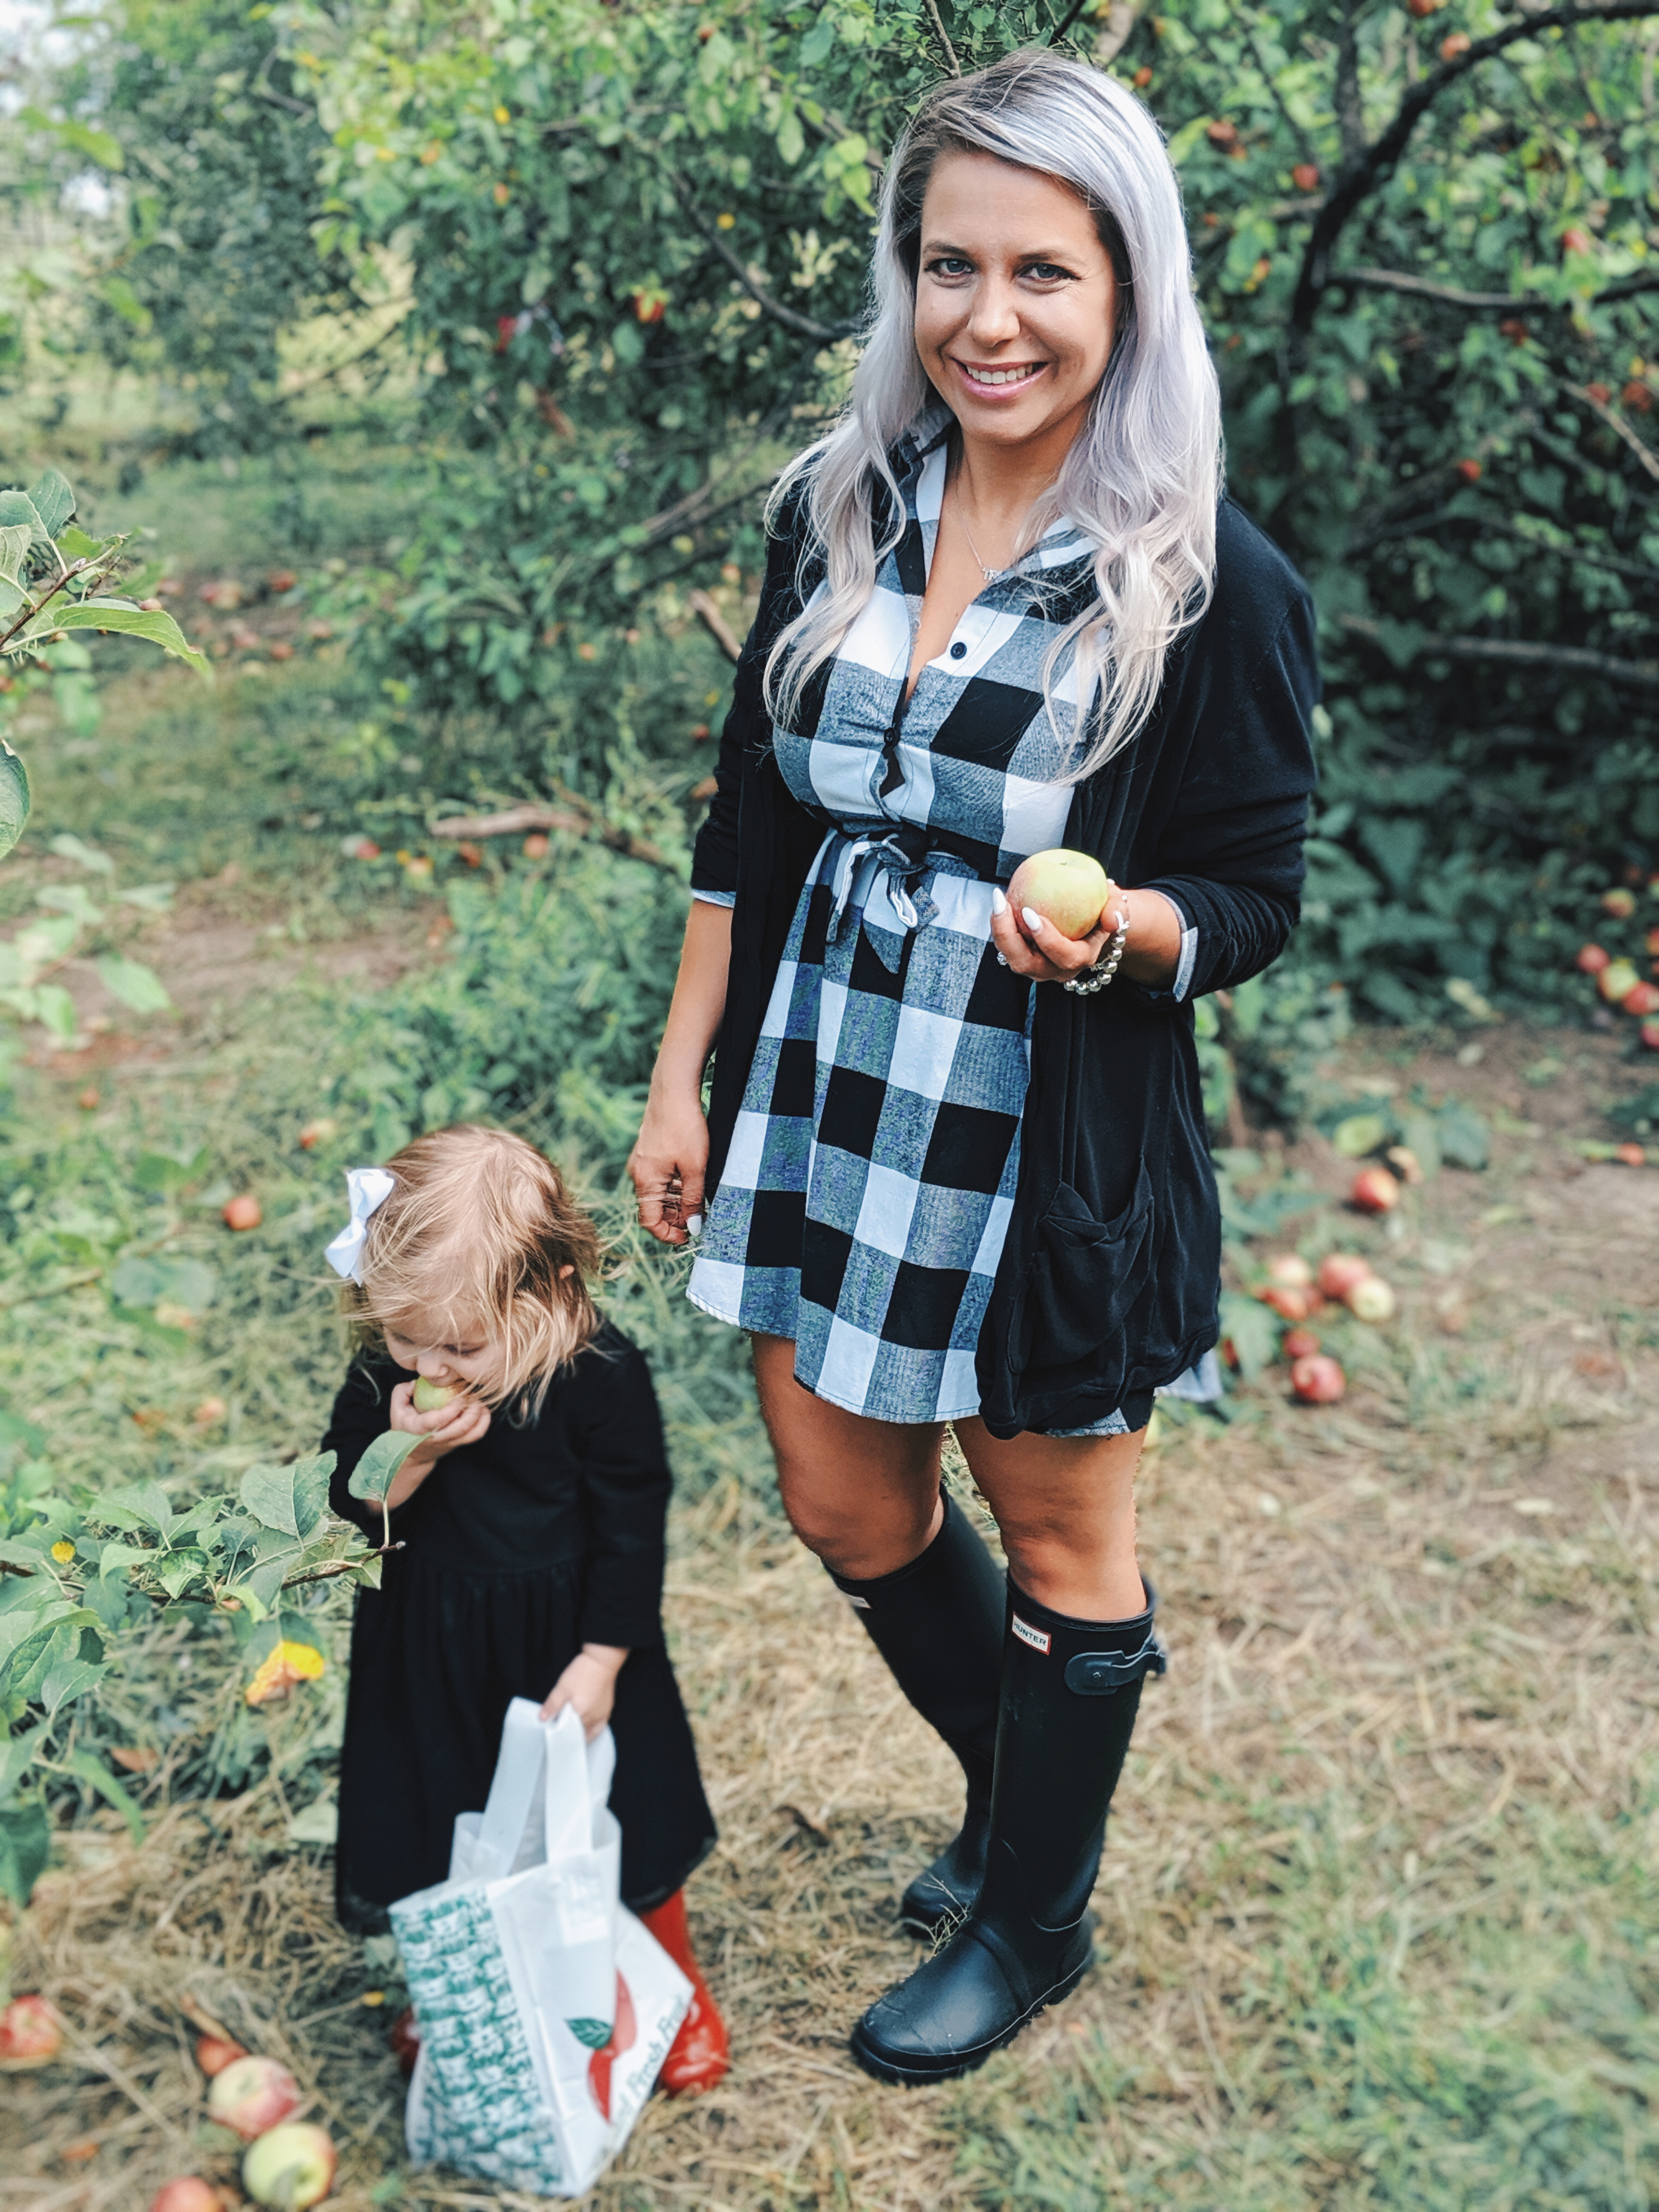 These apple picking photos are too cute! Going apple picking is one of our favorite fall family activities! Here's our apple picking outfits and our experience with apple picking Kansas City at Cider Hill Family Orchard! A great family activity in Kansas City! #applepicking #fallactivities #fall2019 